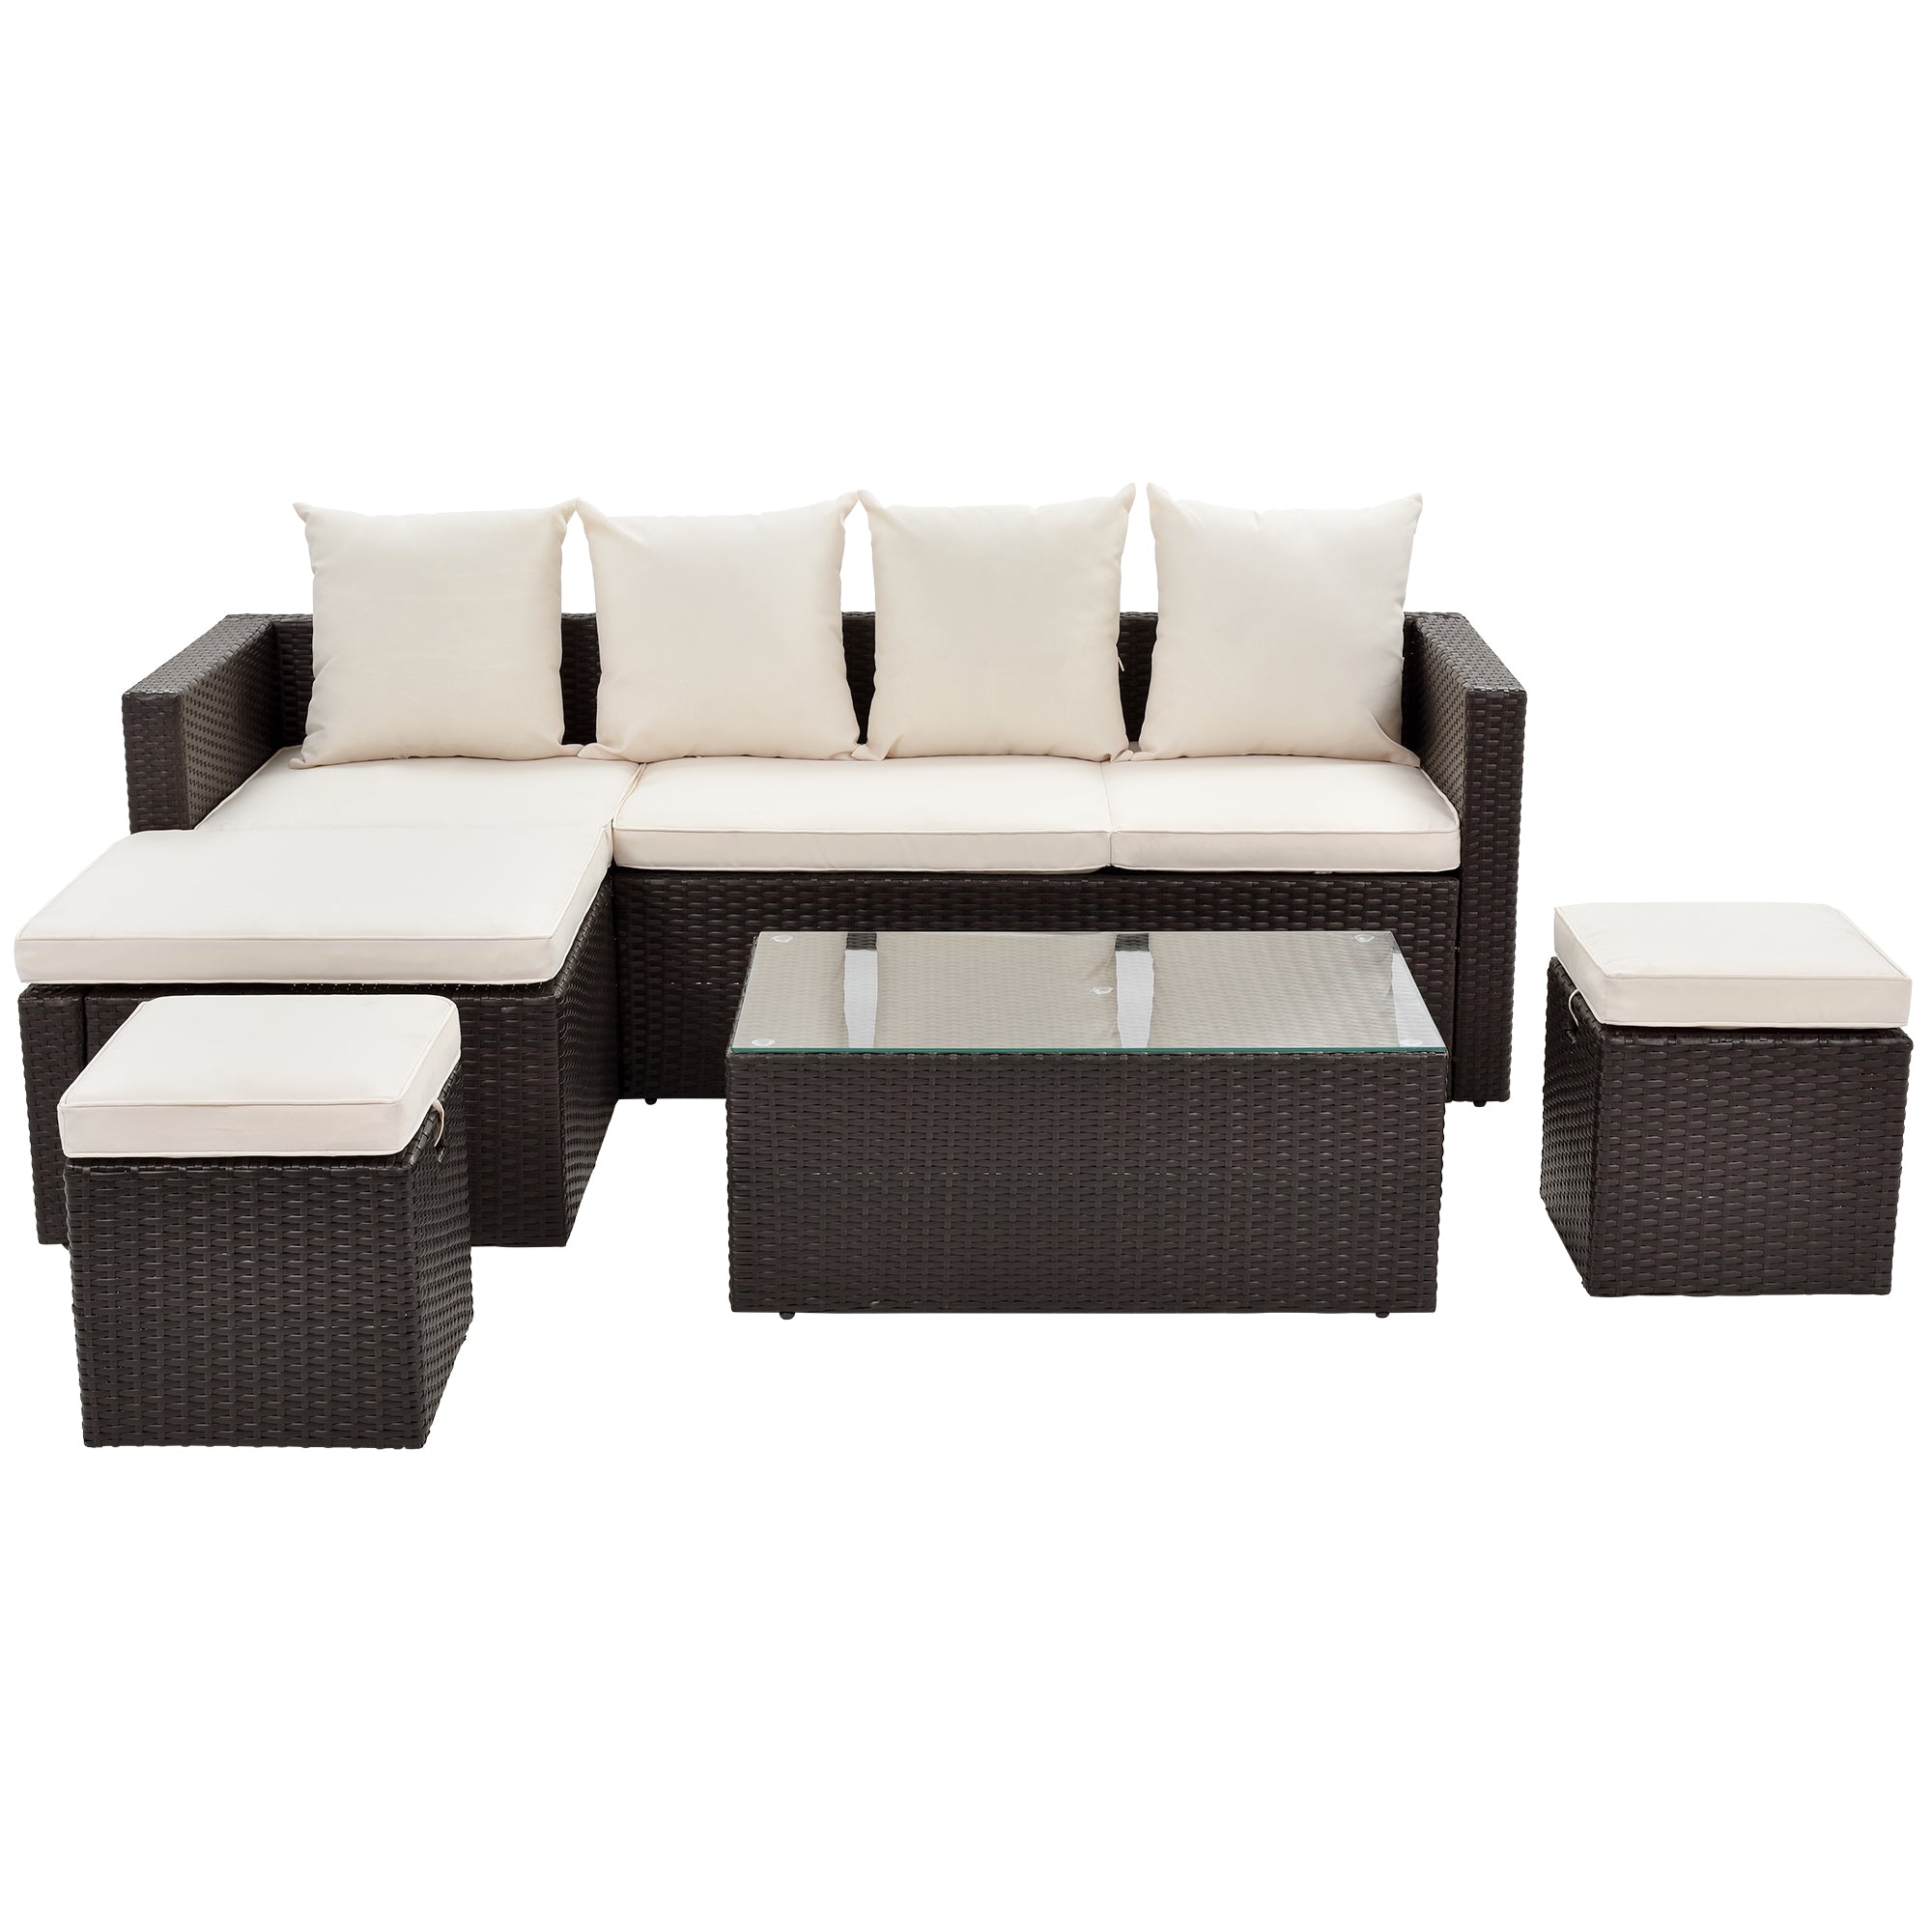 5-Piece Patio Furniture PE Rattan Wicker Lounger Sofa Set with Glass Table and Adjustable Chair (Brown wicker, Beige cushion)-Boyel Living